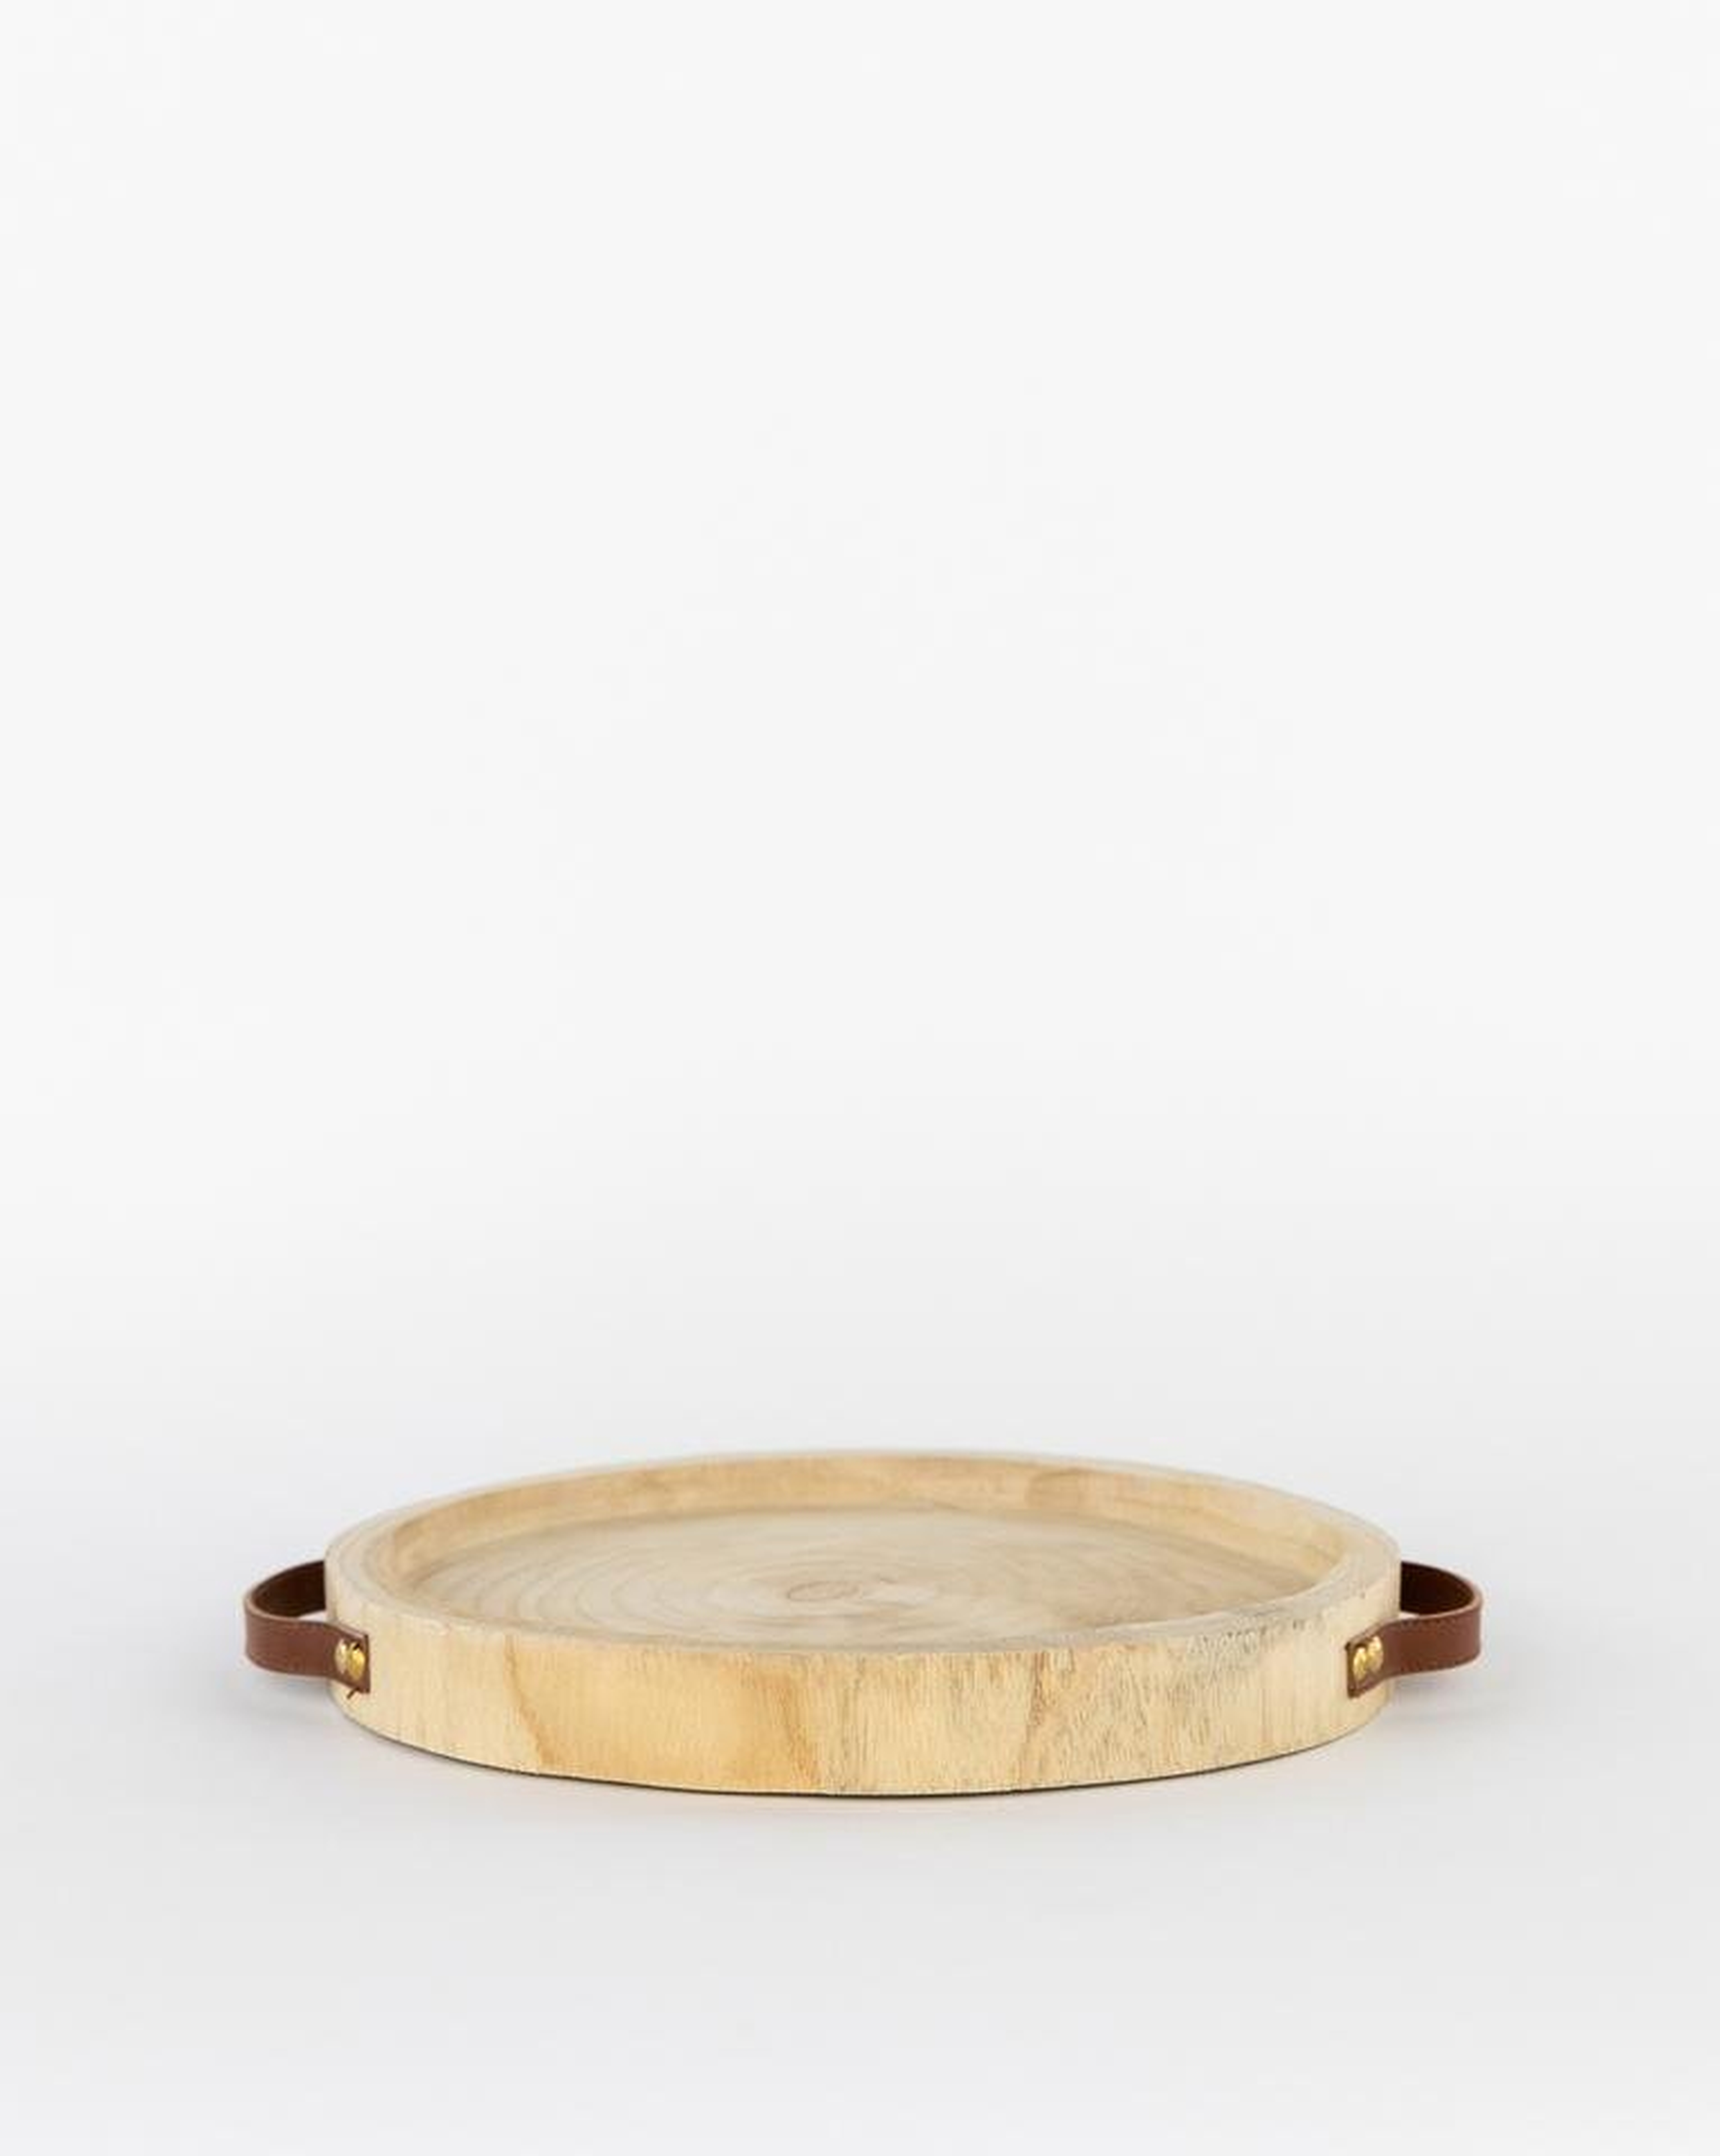 CARVED PAULOWNIA & LEATHER TRAY - McGee & Co.